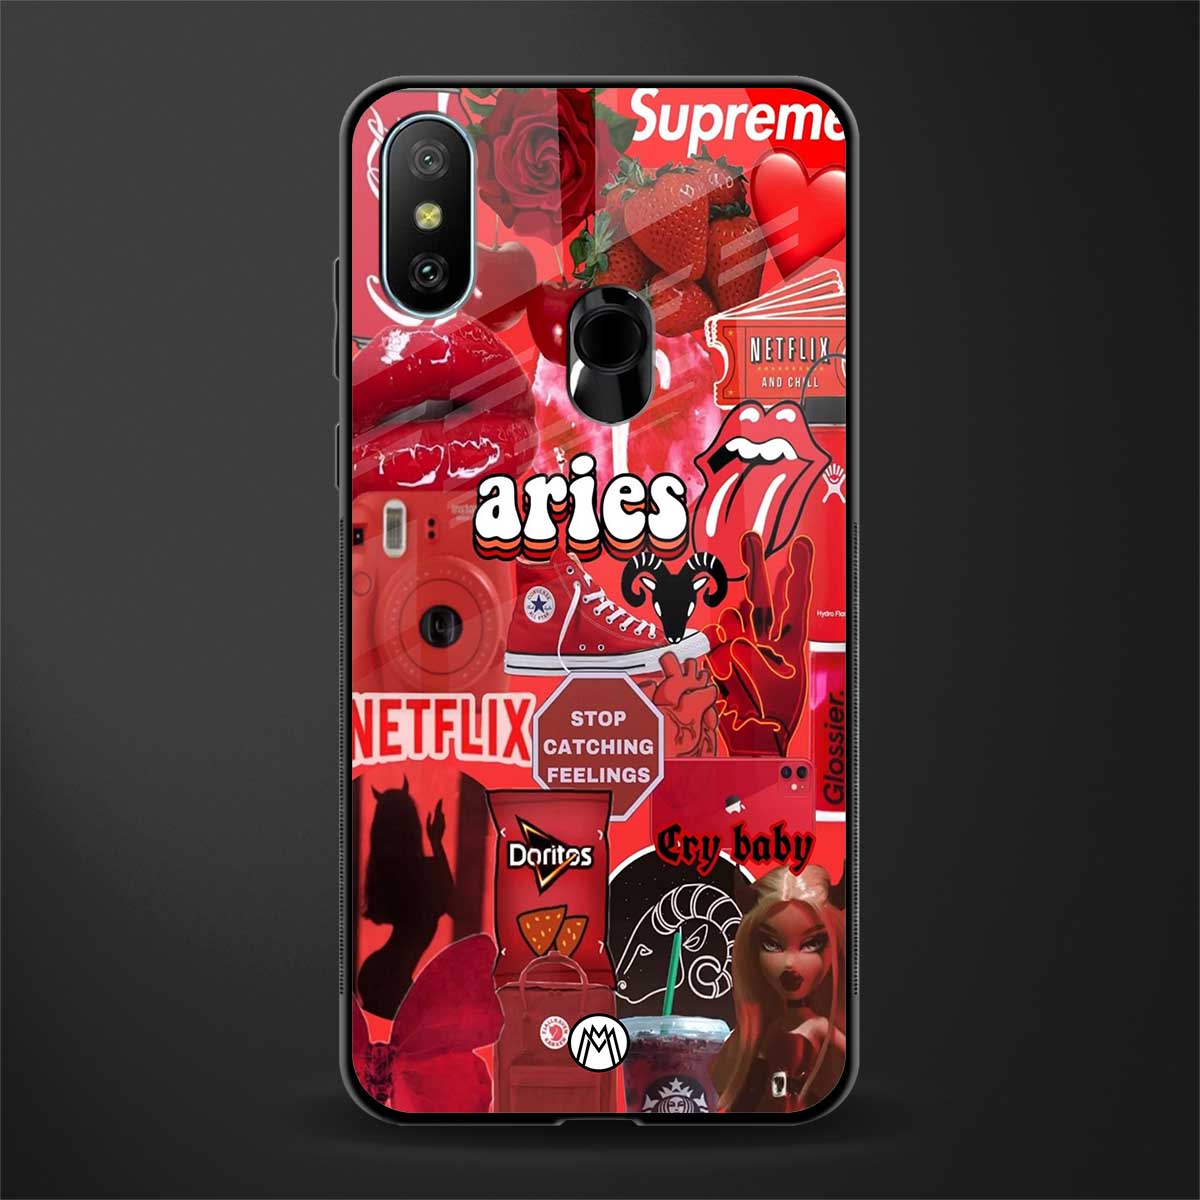 aries aesthetic collage glass case for redmi 6 pro image